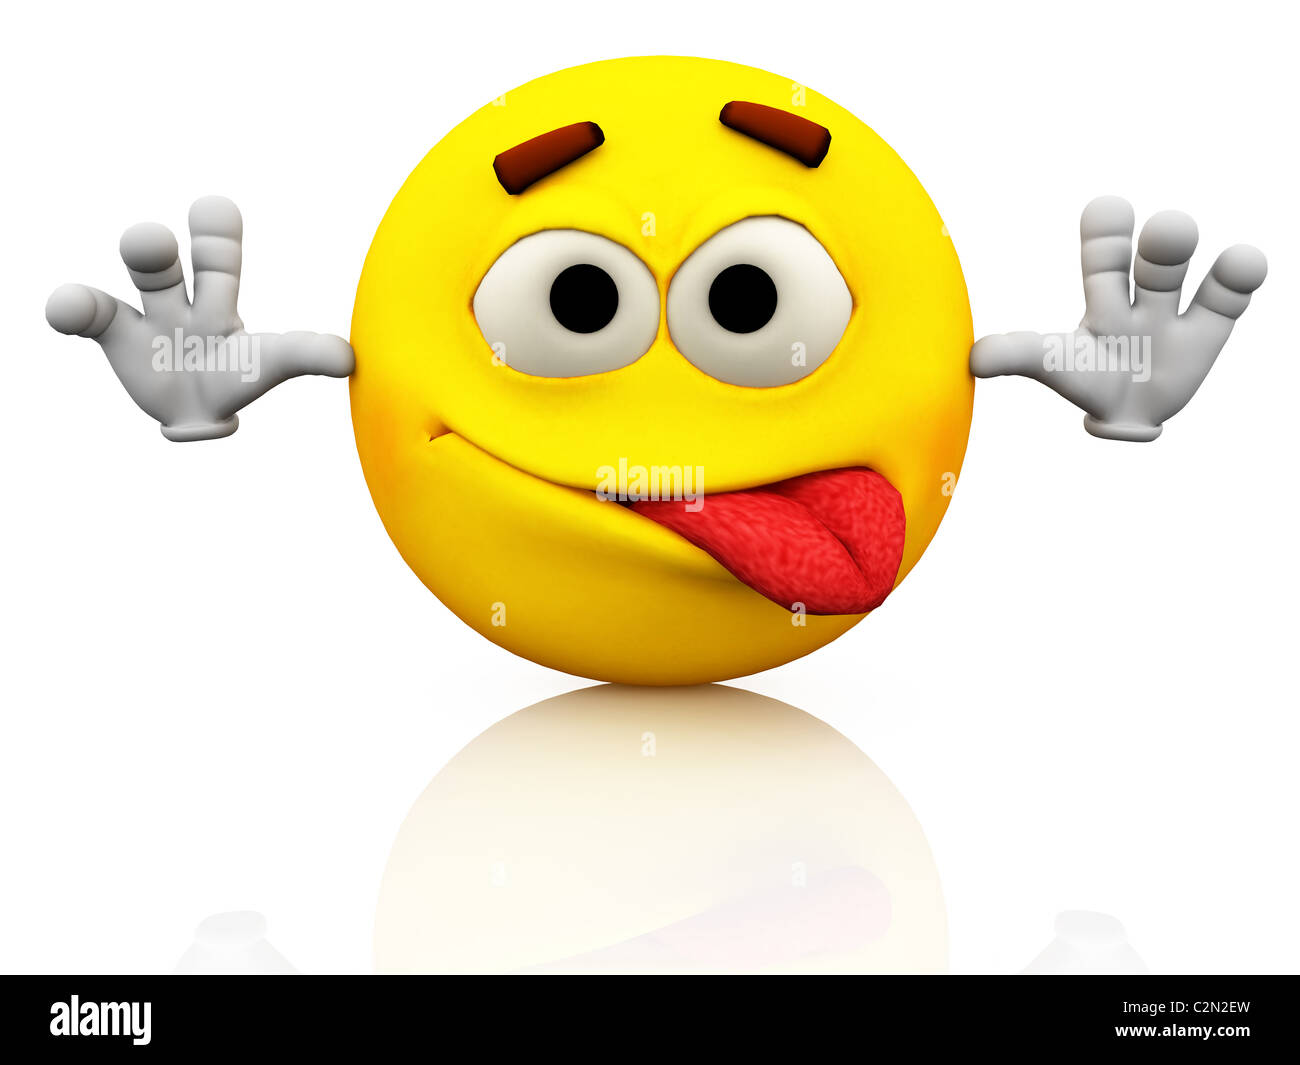 Smiley, Emoticon. Facial expression. Emotional tongue out expression on a  yellow face with large eyes. Gesture happy Stock Photo - Alamy